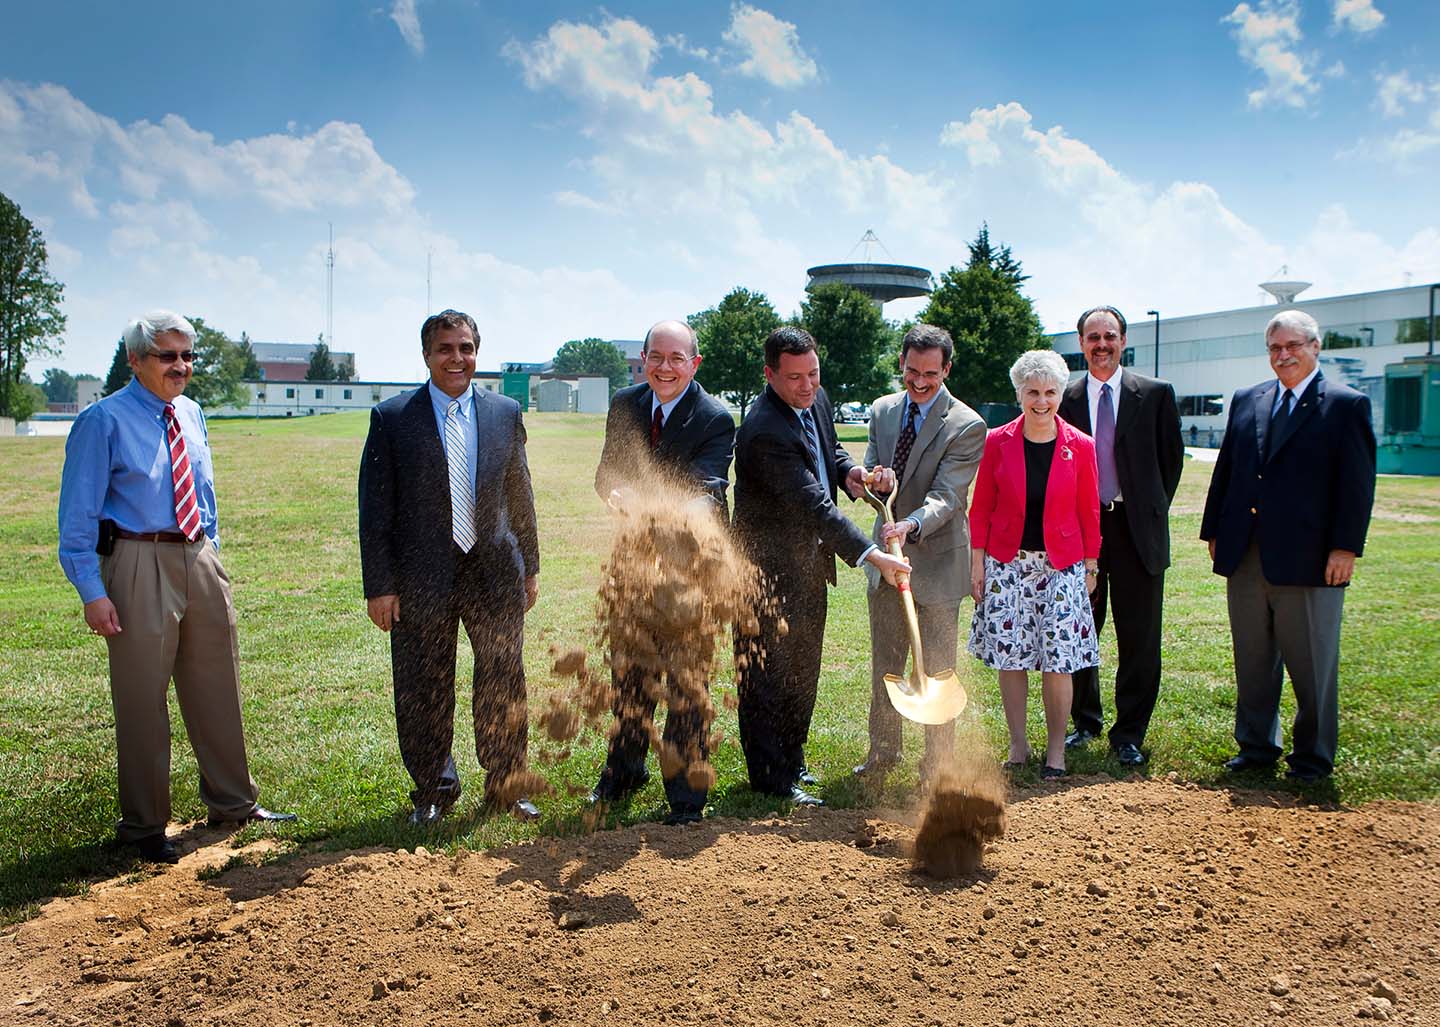 Breaking ground for the Johns Hopkins Applied Physics Laboratory's new spacecraft integration and test facility